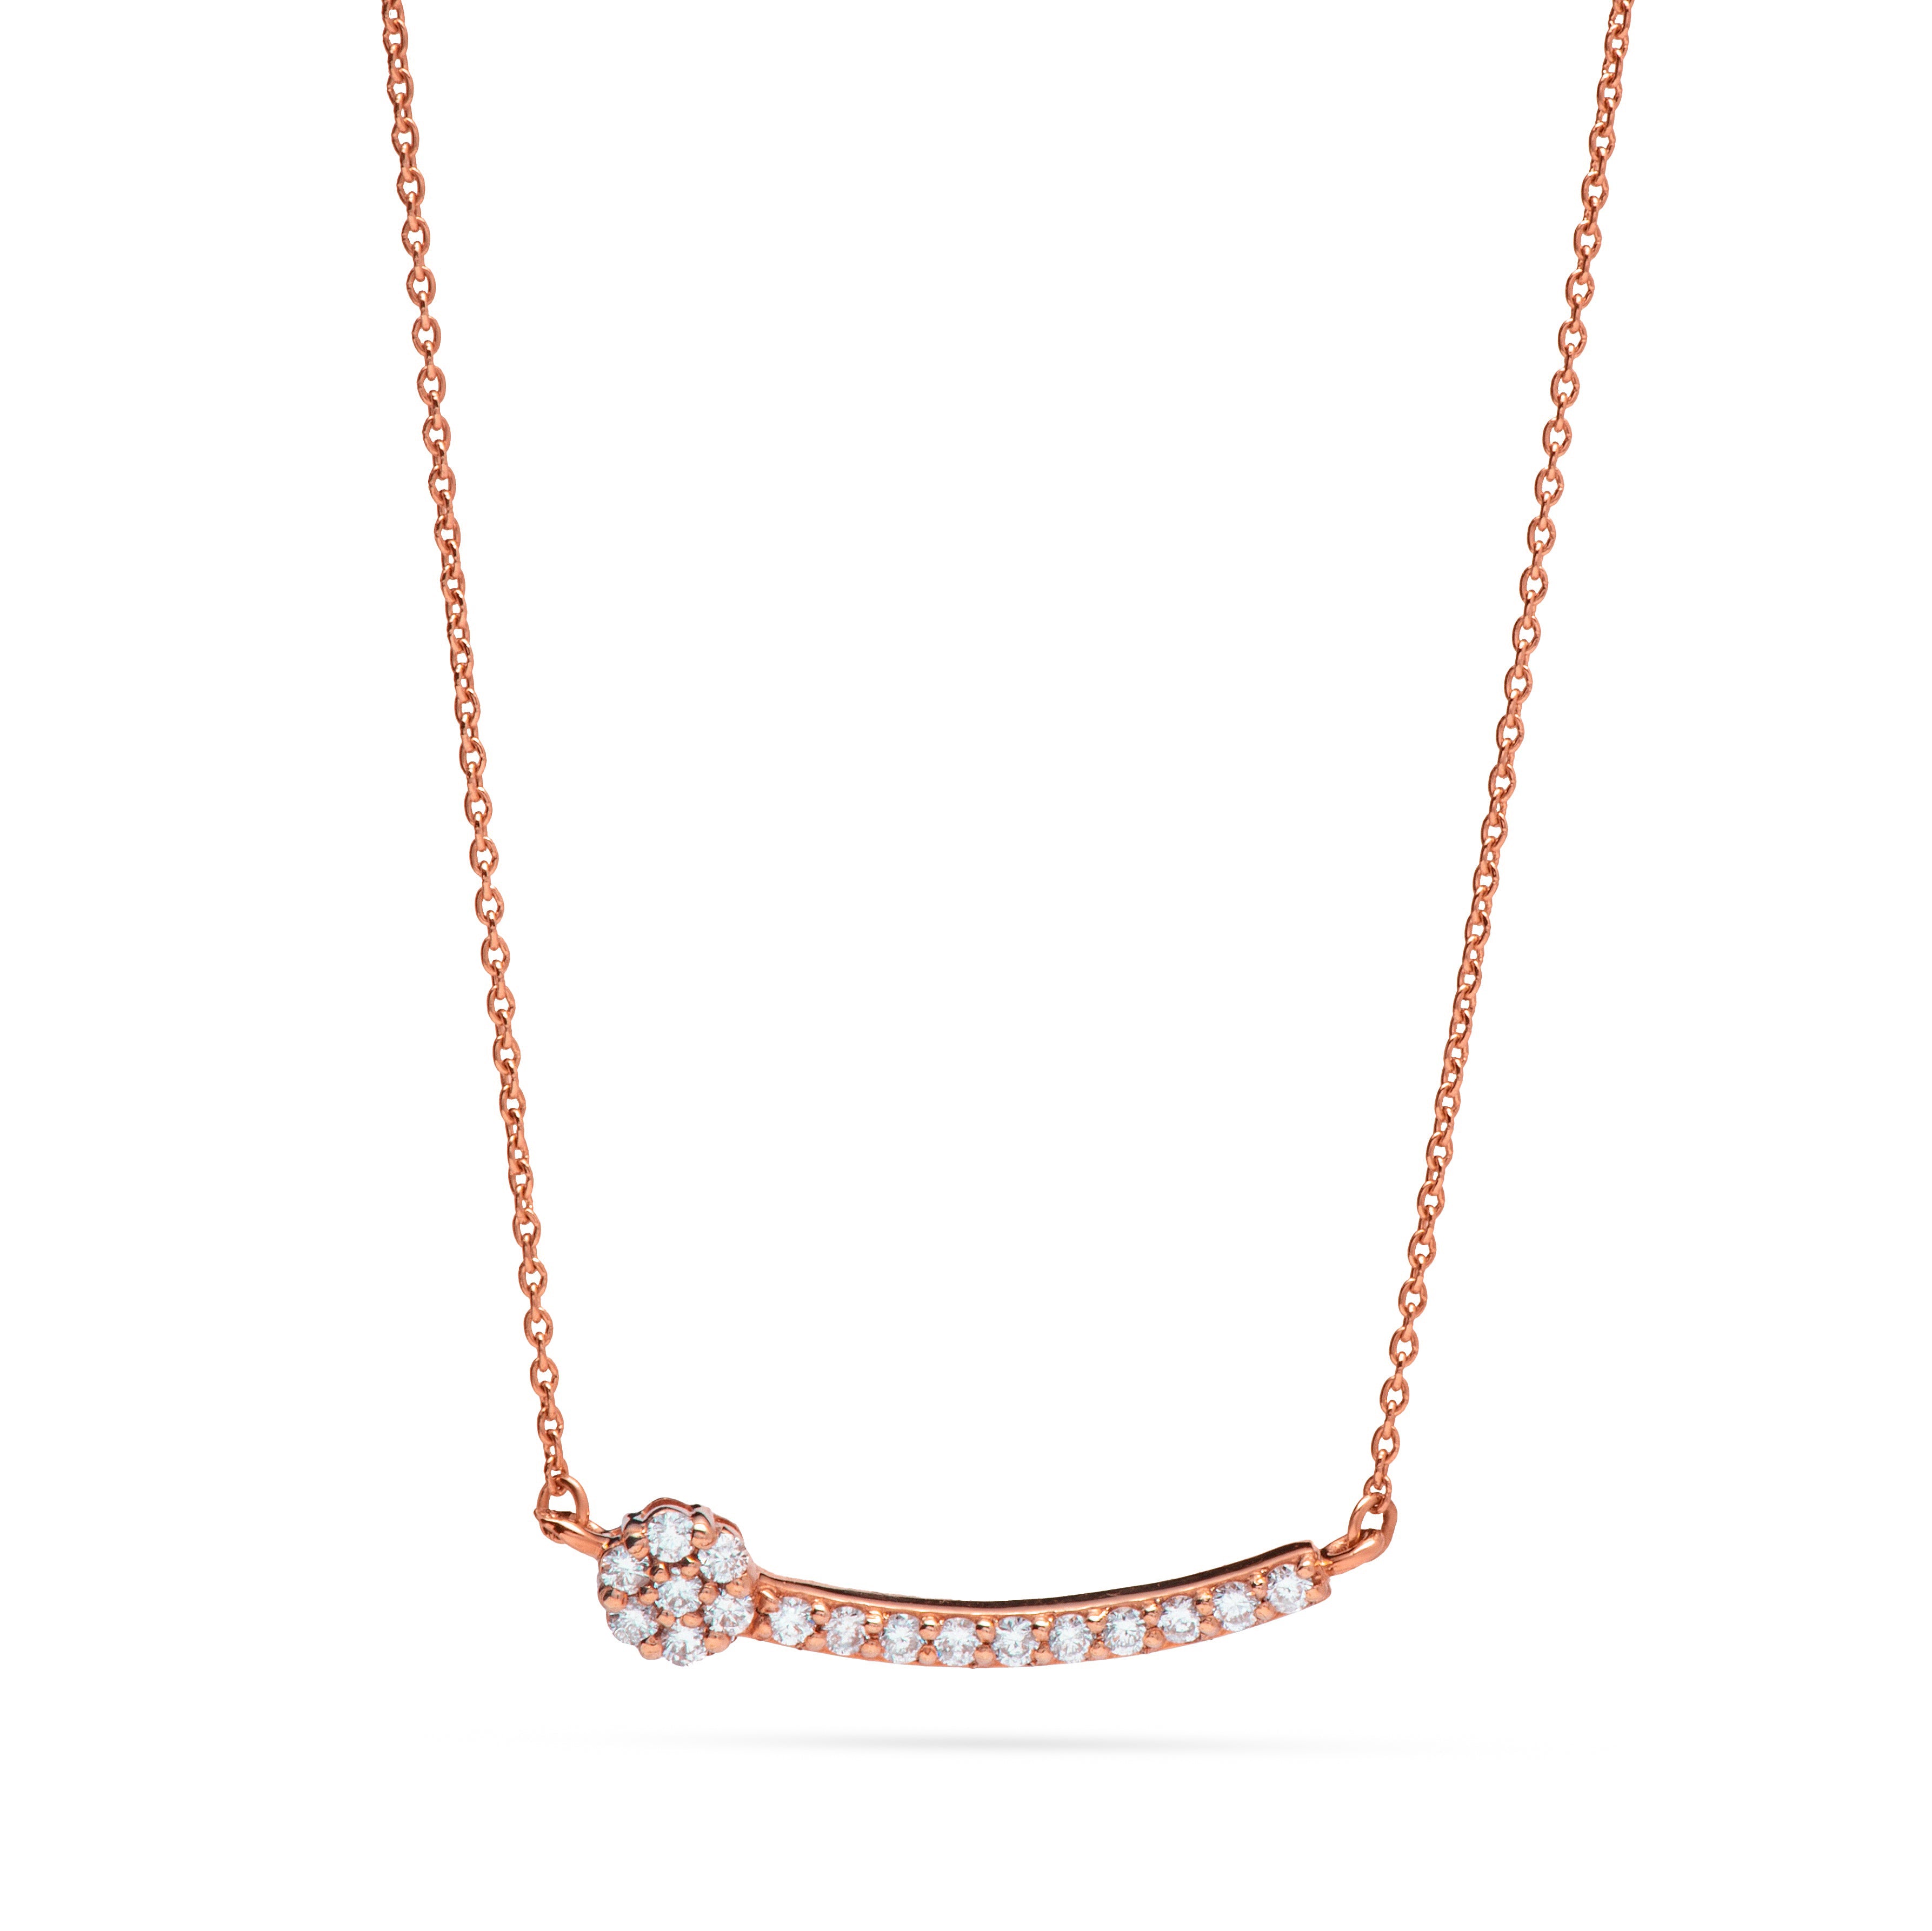 A magnificent Diamond necklace Bar in 18K Rose gold - SIR1336